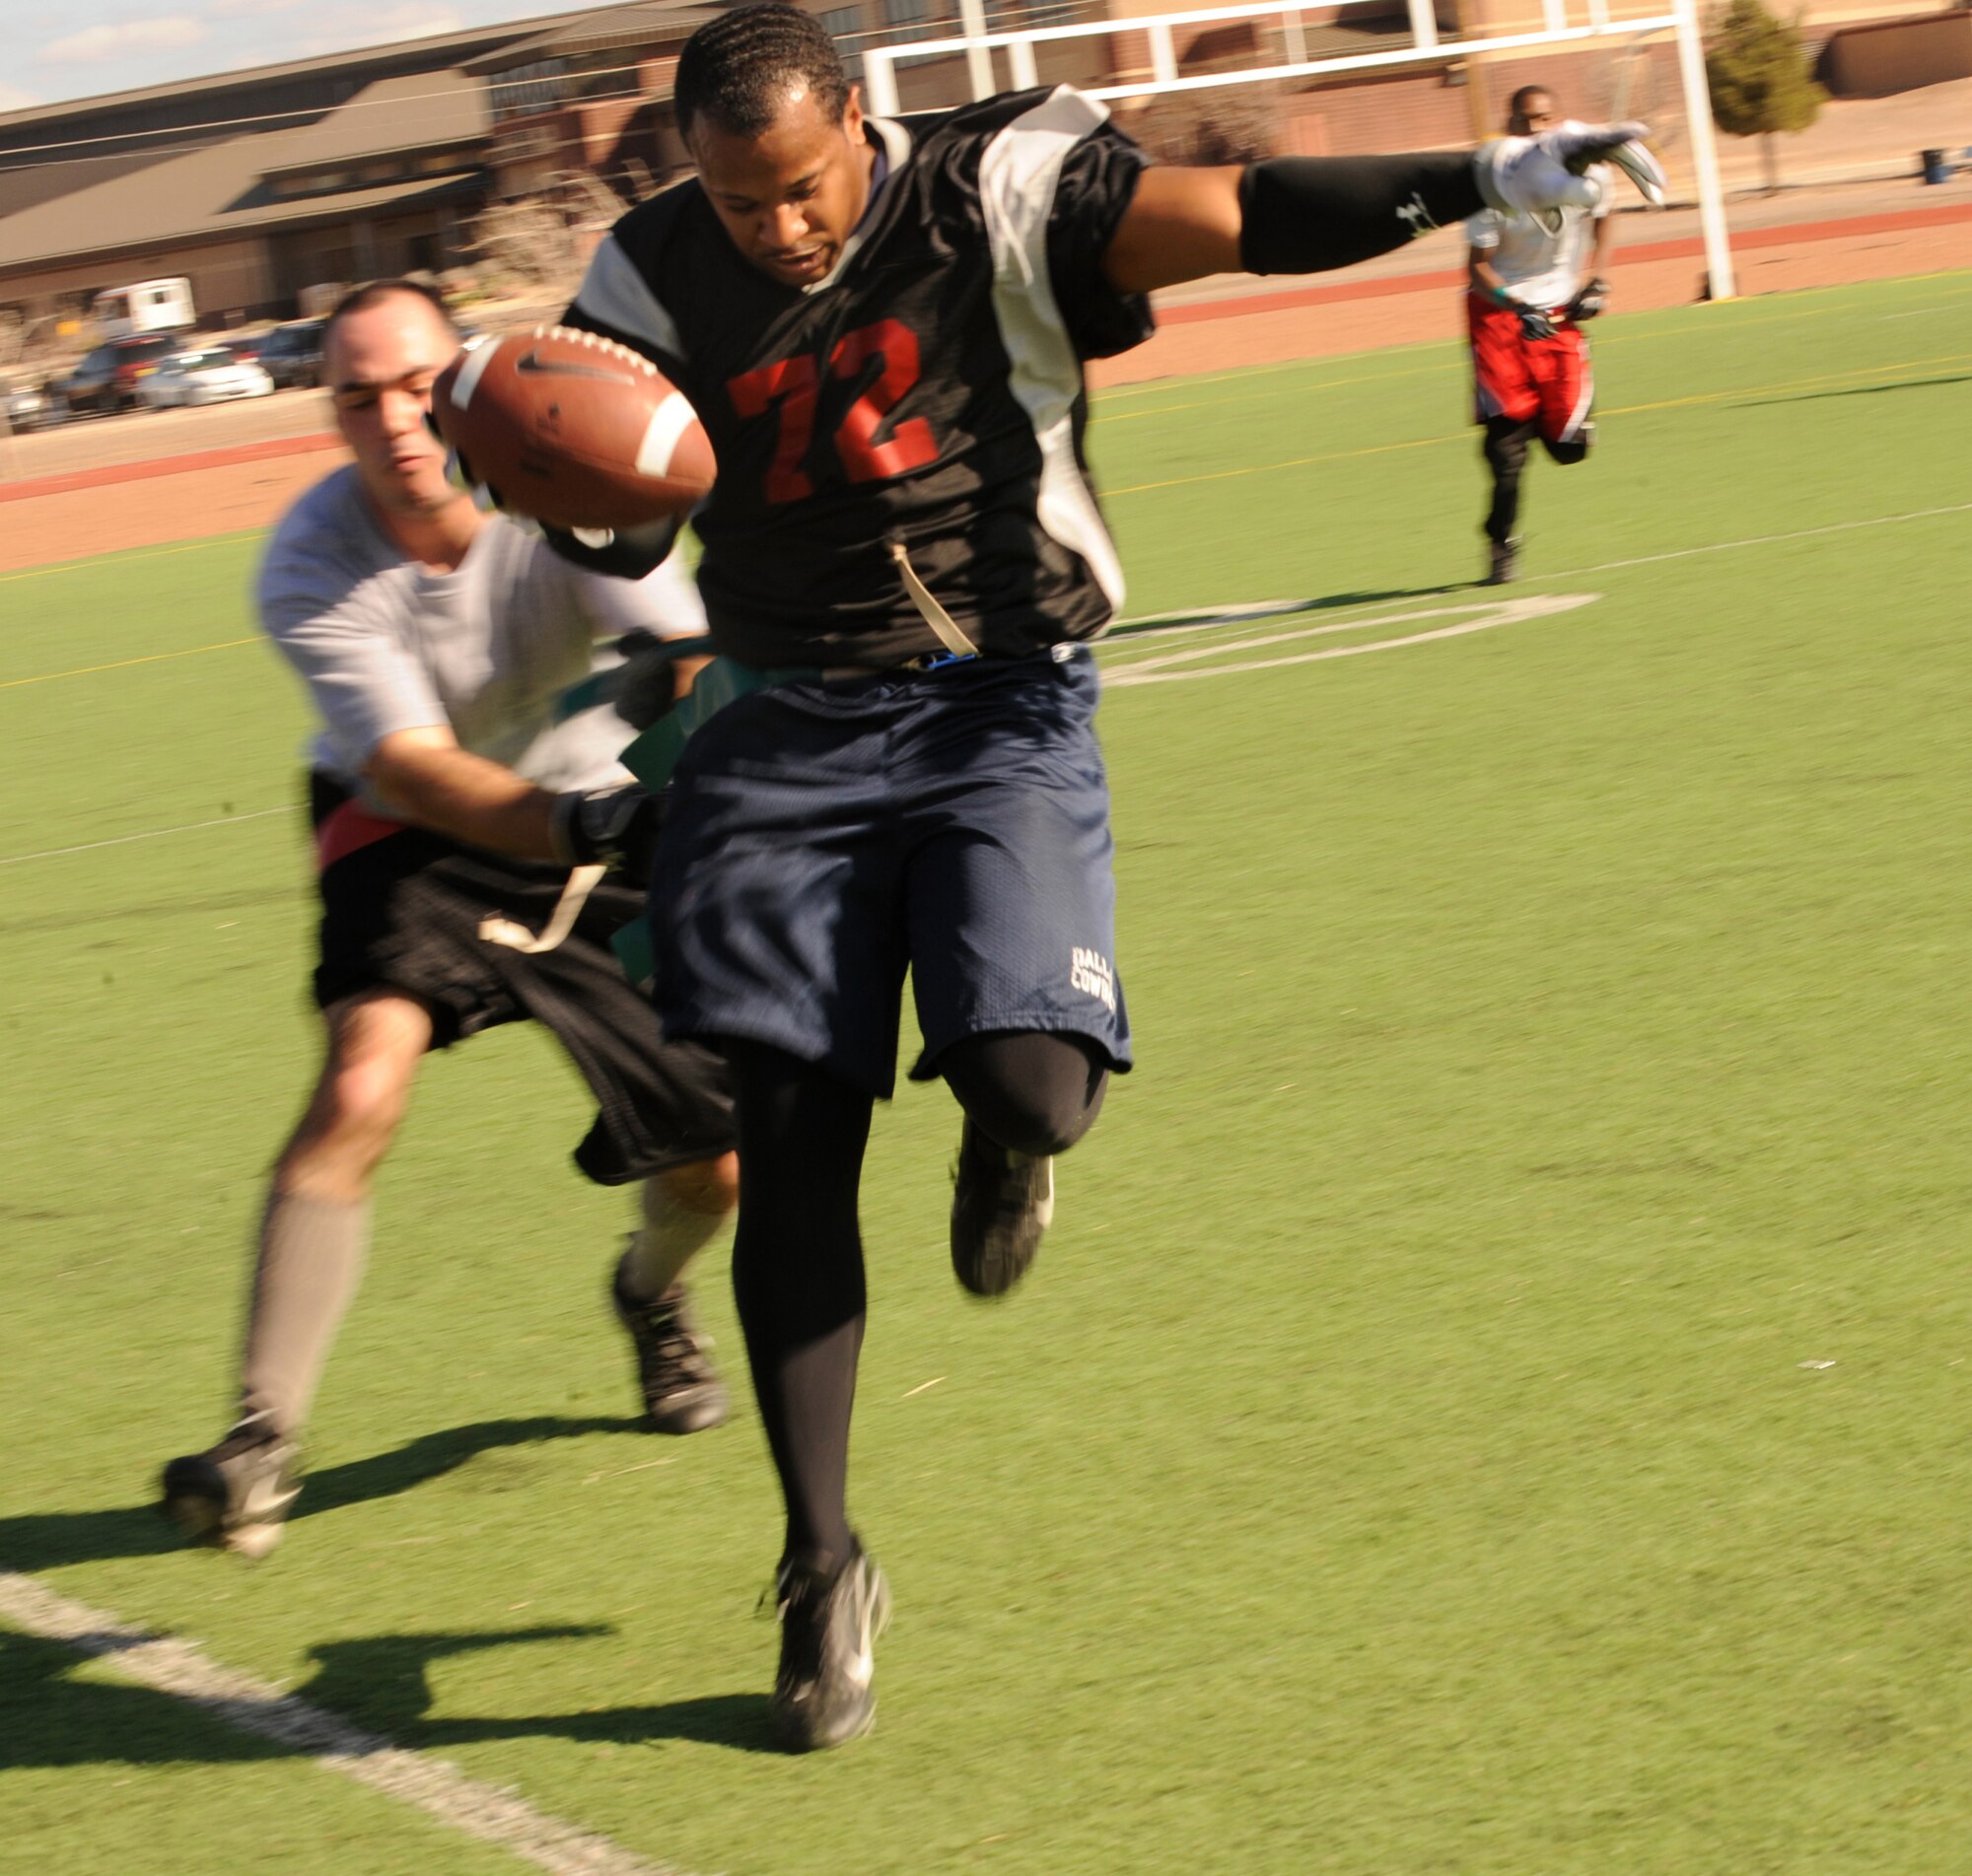 HOLLOMAN AIR FORCE BASE, N.M. -- Willie Green, of the 49th Aircraft Maintenance Squadron, tip-toes down the sideline during the Flag Football Championship game Dec. 19. The 49th AMXS went 3 - 2 in the double elimination tournament to make it to the championship, but fell by 7 points in the final game against the 49th Maintenance Squadron. (U.S. Air Force photo by Airman 1st Class Sondra Escutia)